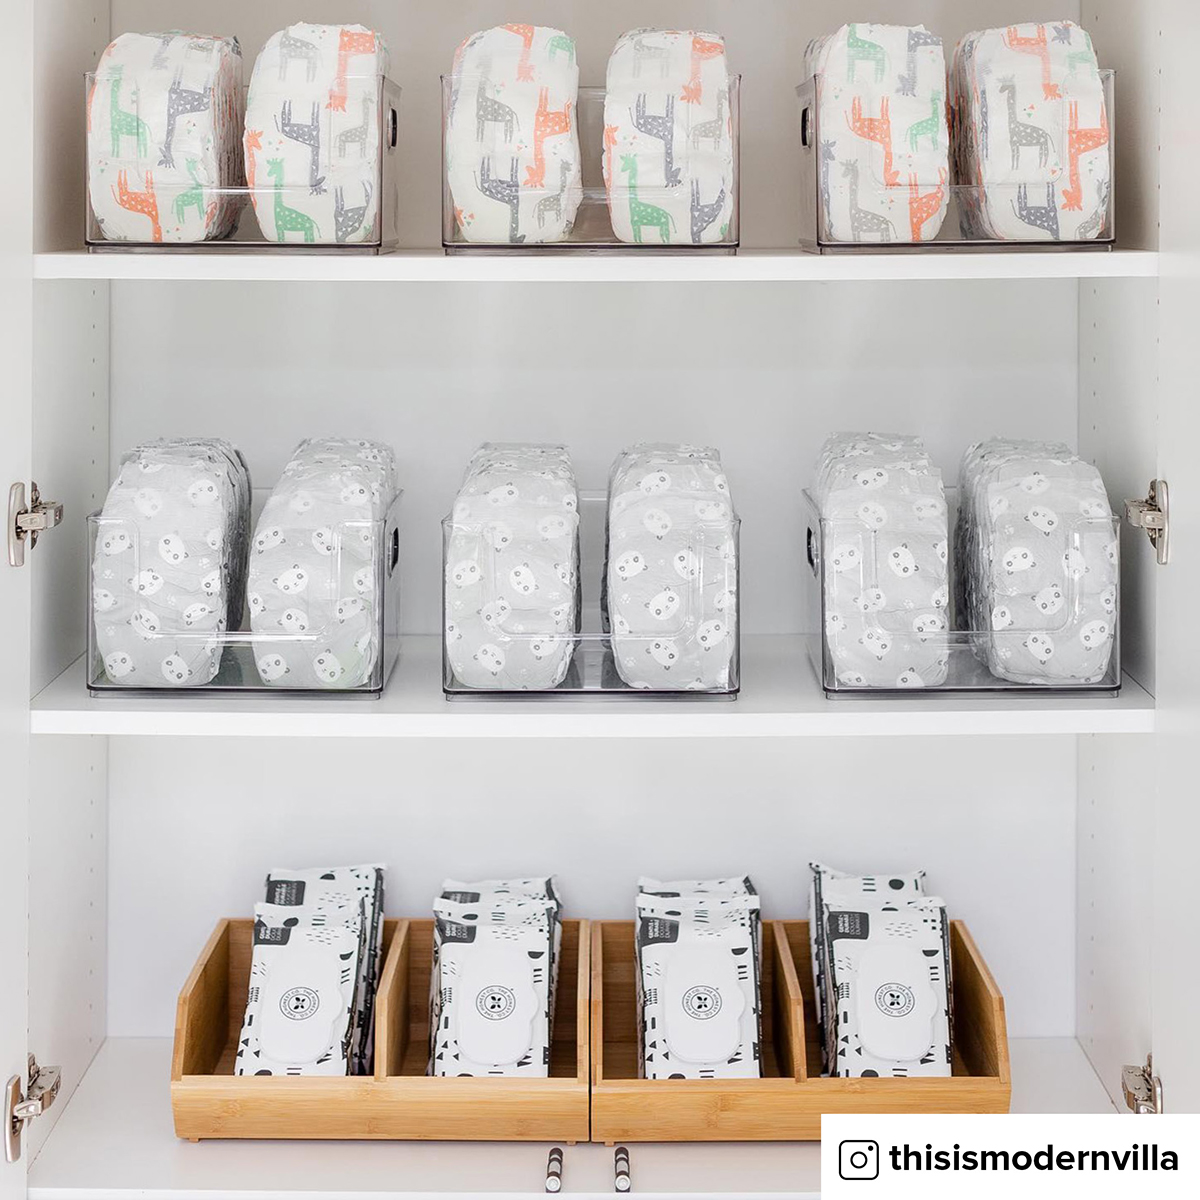 https://www.containerstore.com/catalogimages/416907/thisismodernvilla.jpg